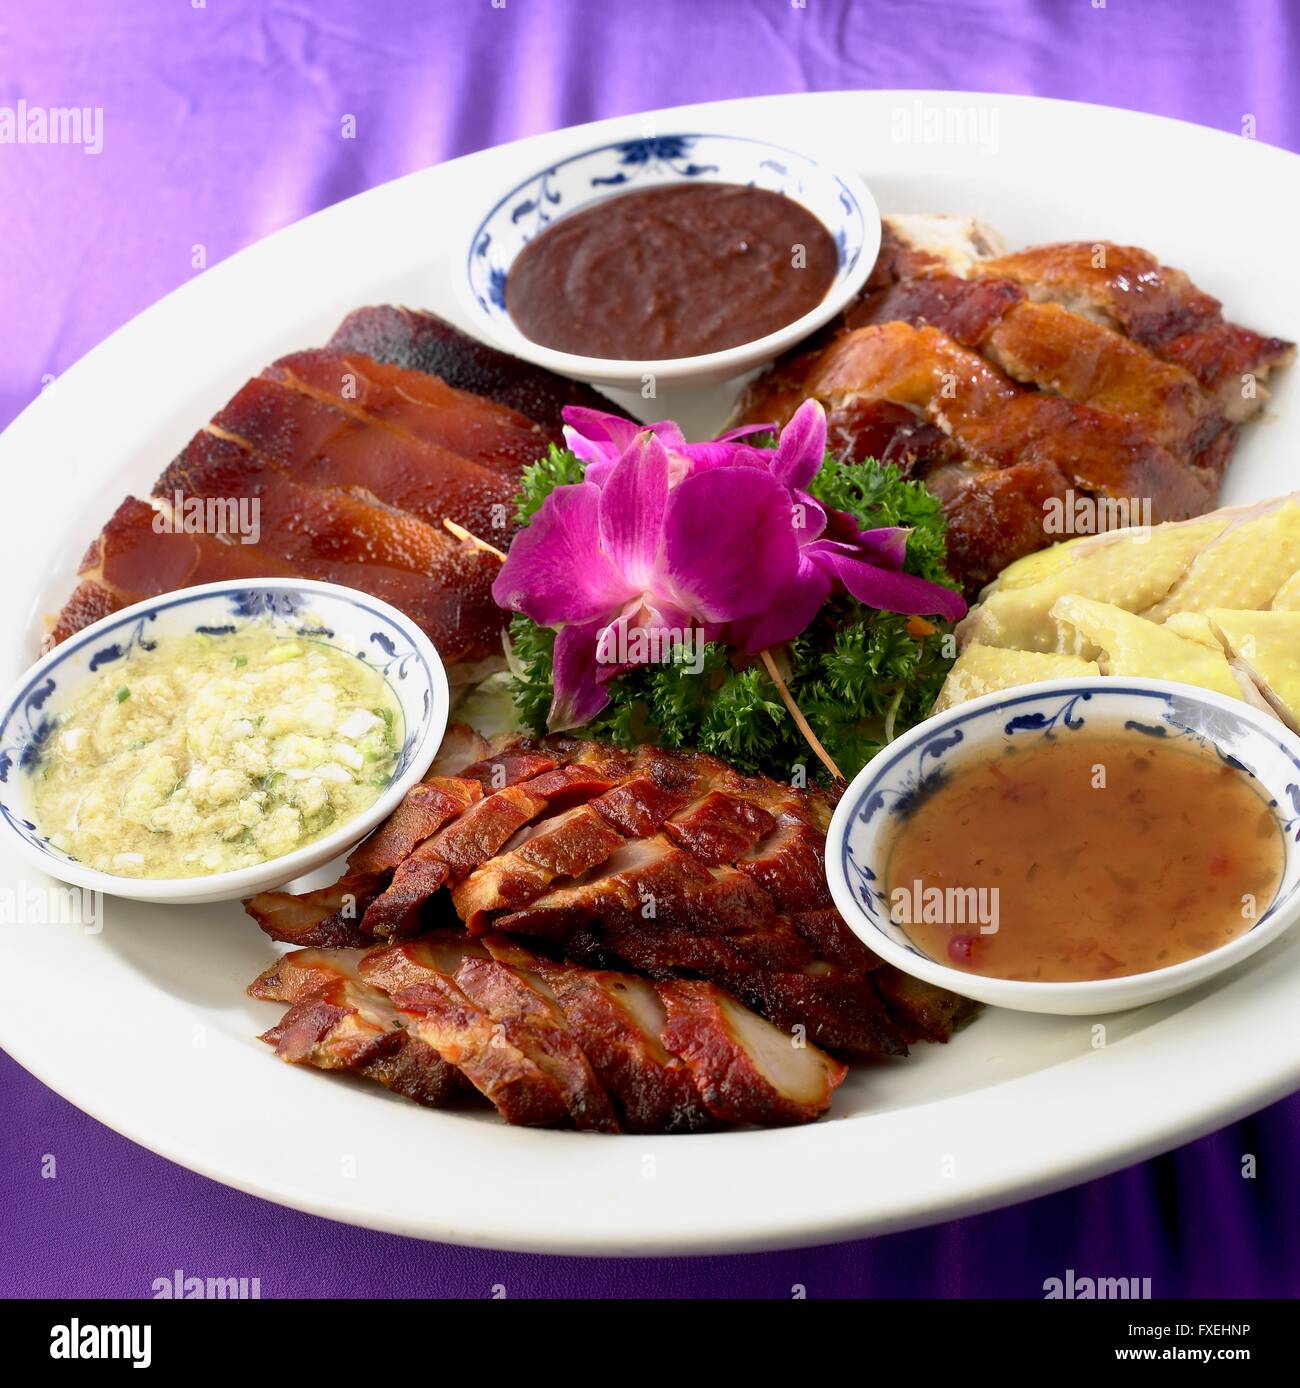 Chinese roast meats, including cuts of suckling pig, duck, pork, and chicken, served on platter with dipping sauces and garnished with parsley and flowers Stock Photo